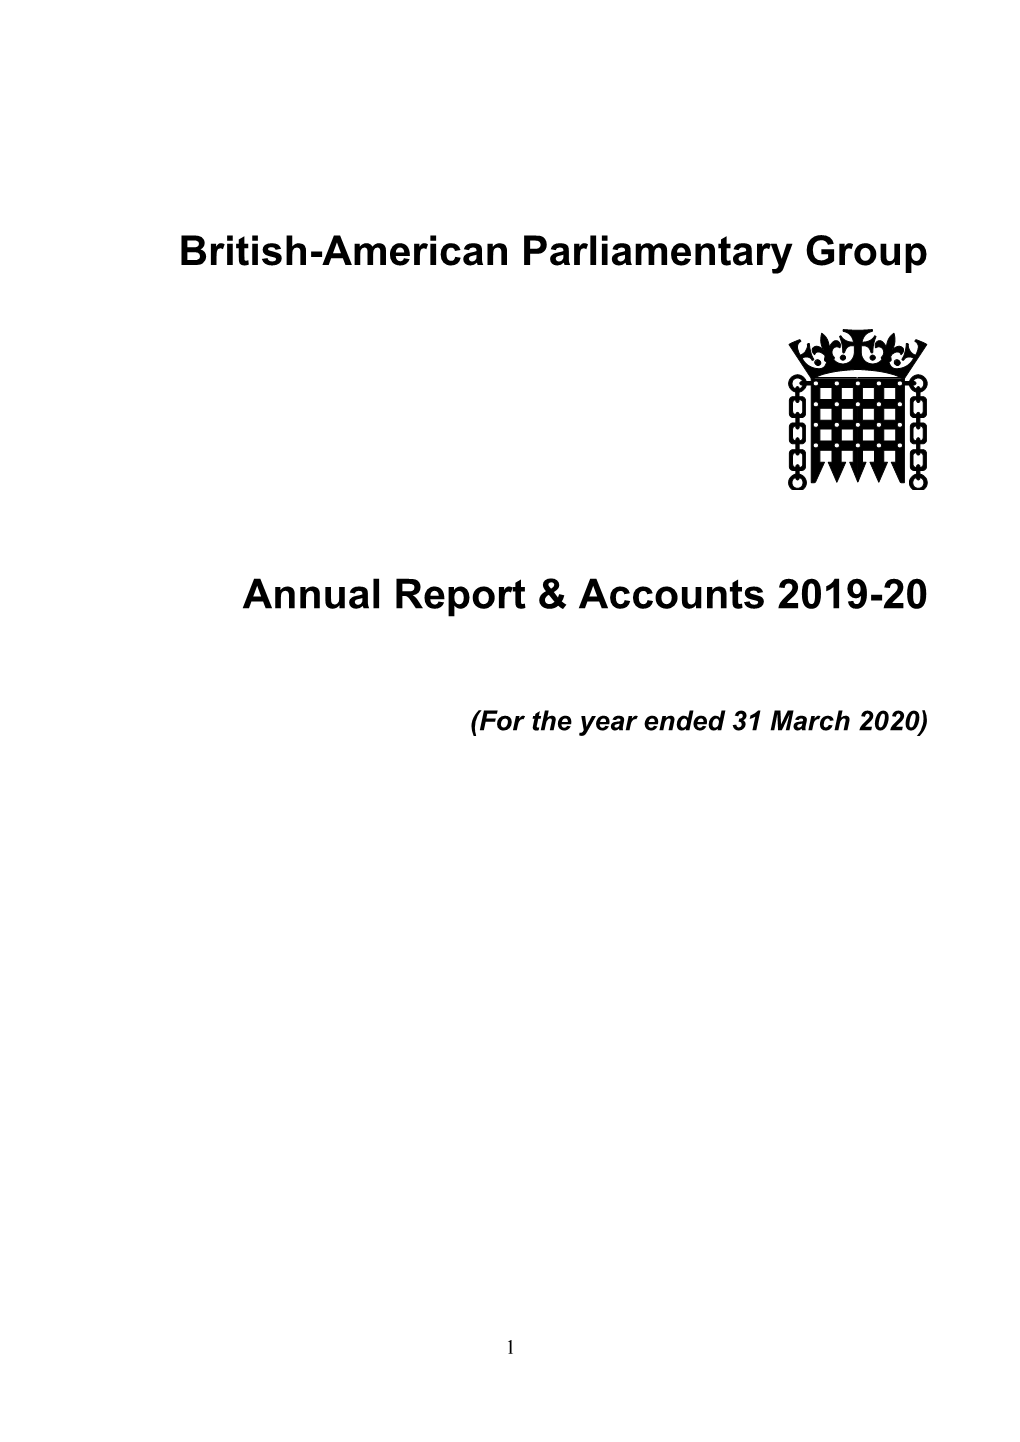 British-American Parliamentary Group Annual Report & Accounts 2019-20